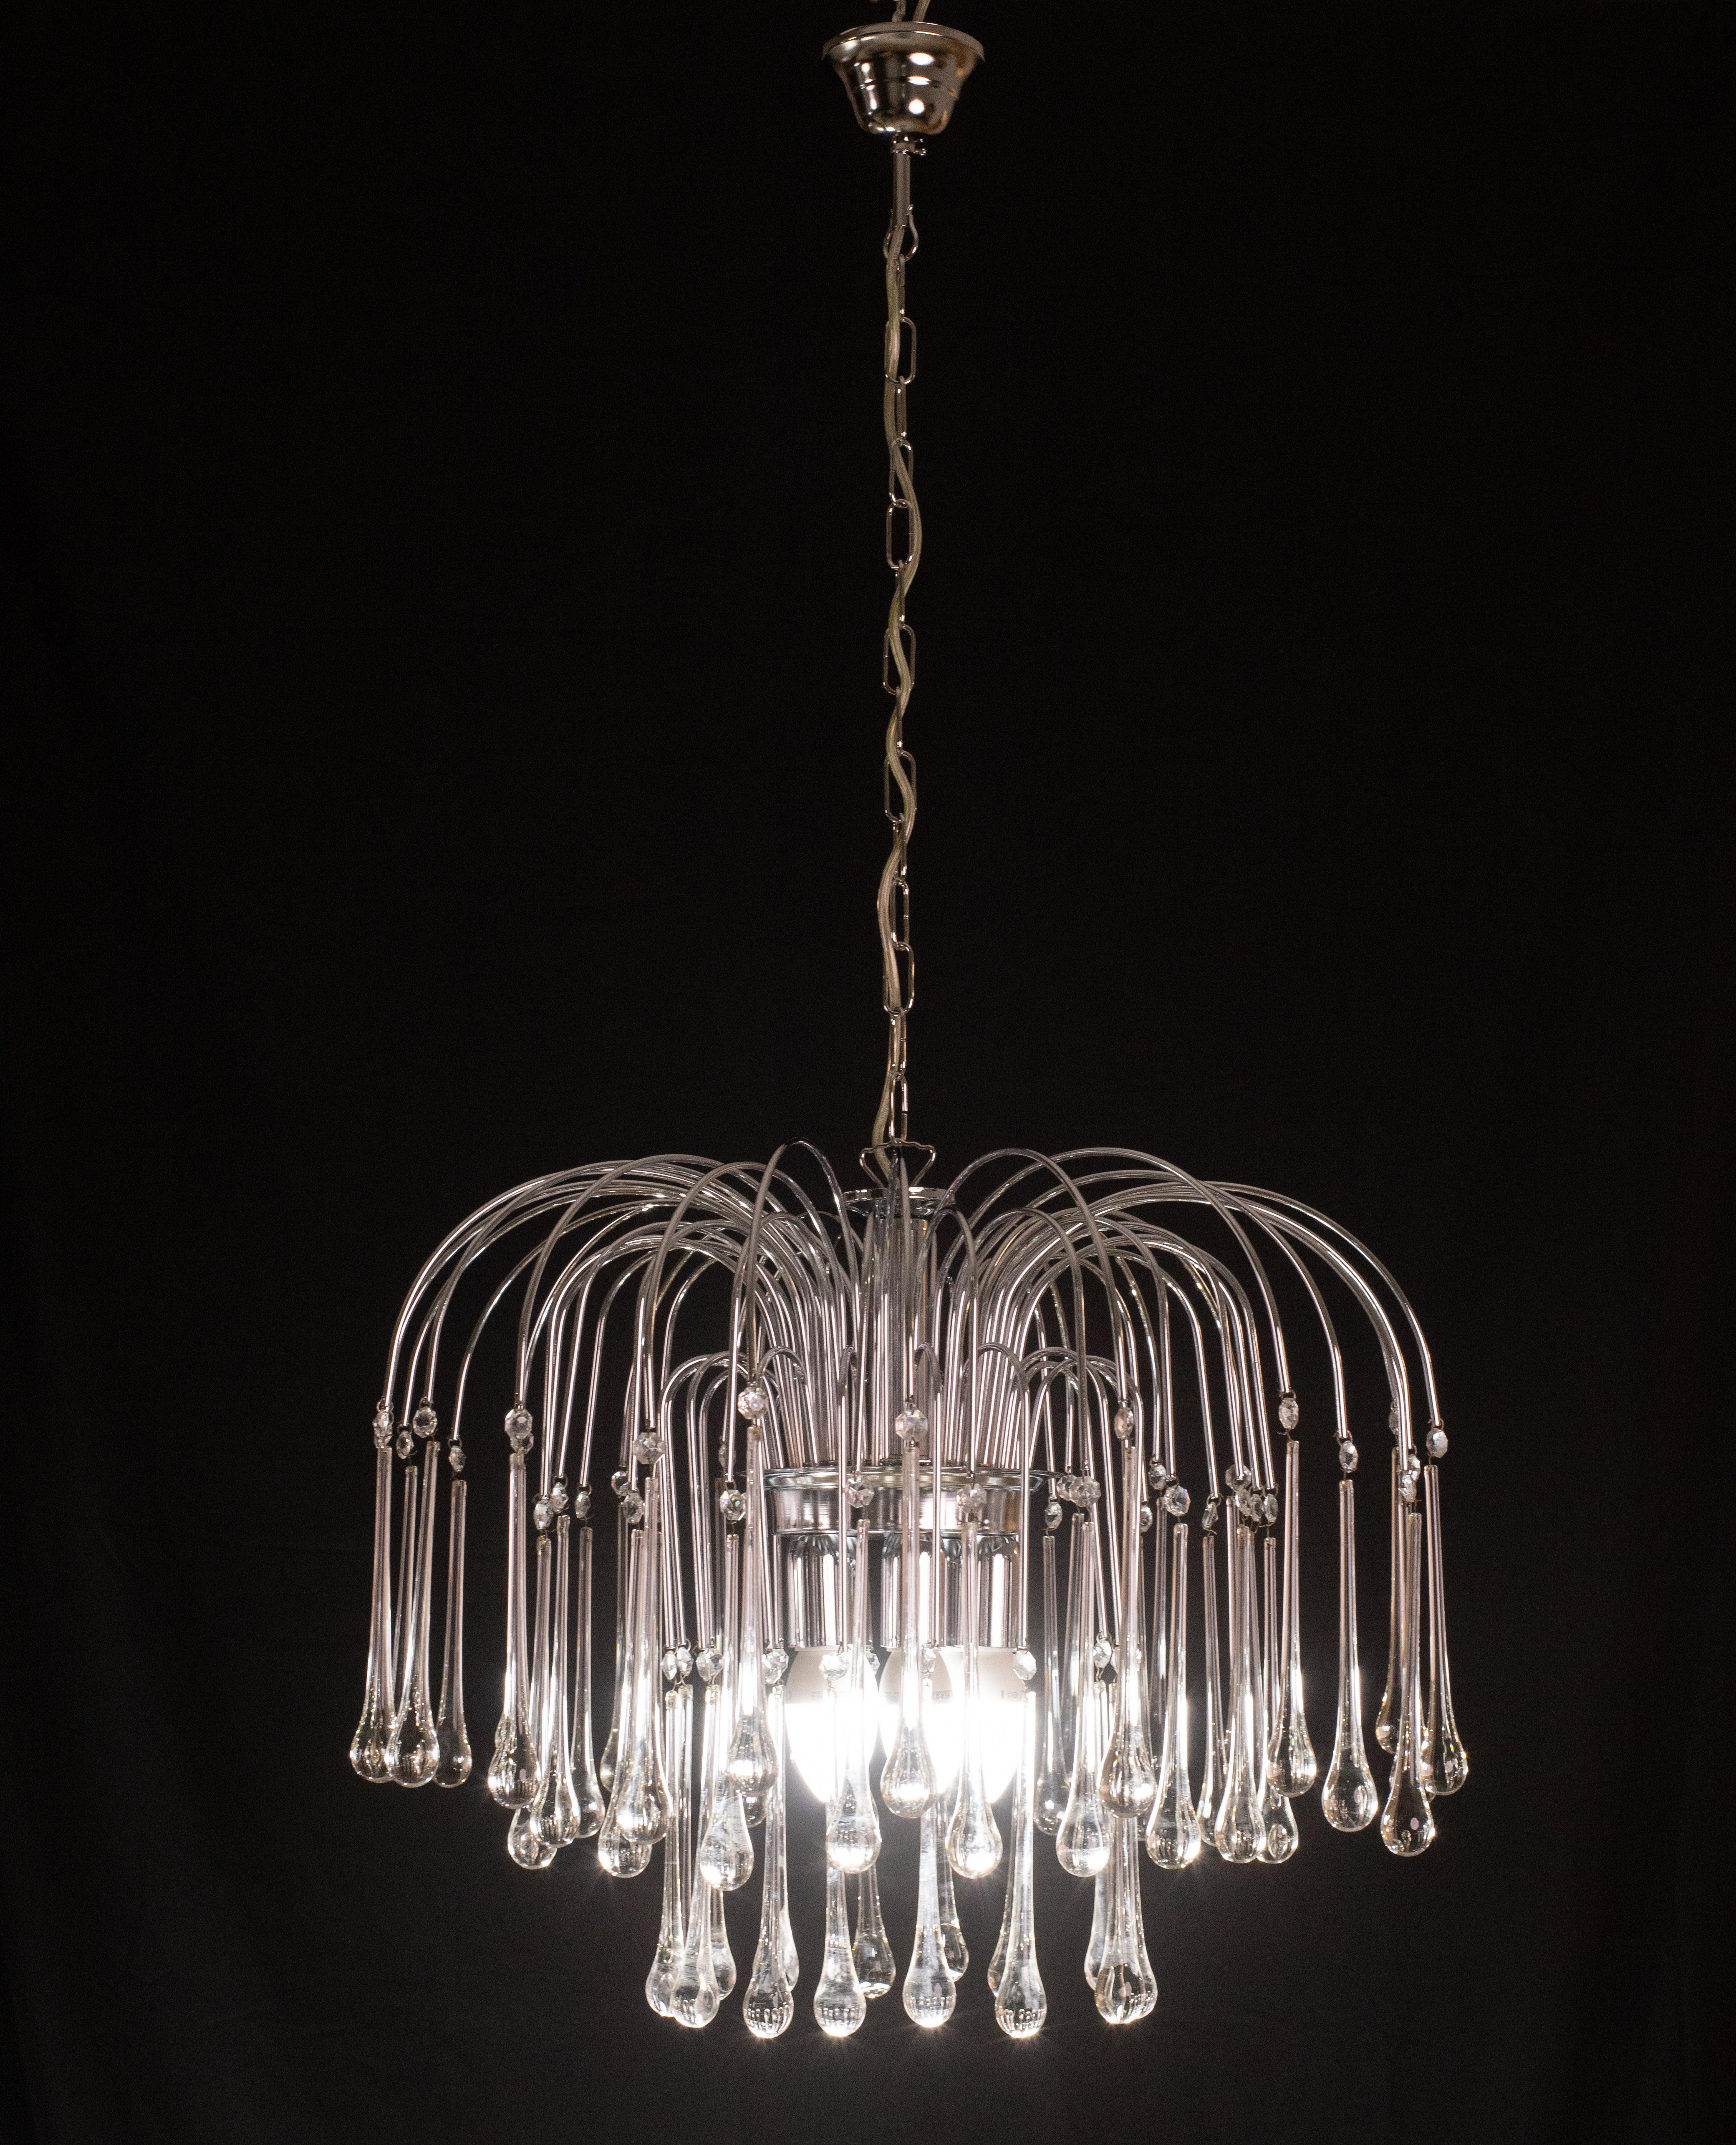 Stunning Murano chandelier in the style of Venini La Cascata.
The chandelier consists of three laps composed of beautiful transparent white drops cascading down each with a crystal attached.
The frame is nickel-plated silver and compleatly new.
The